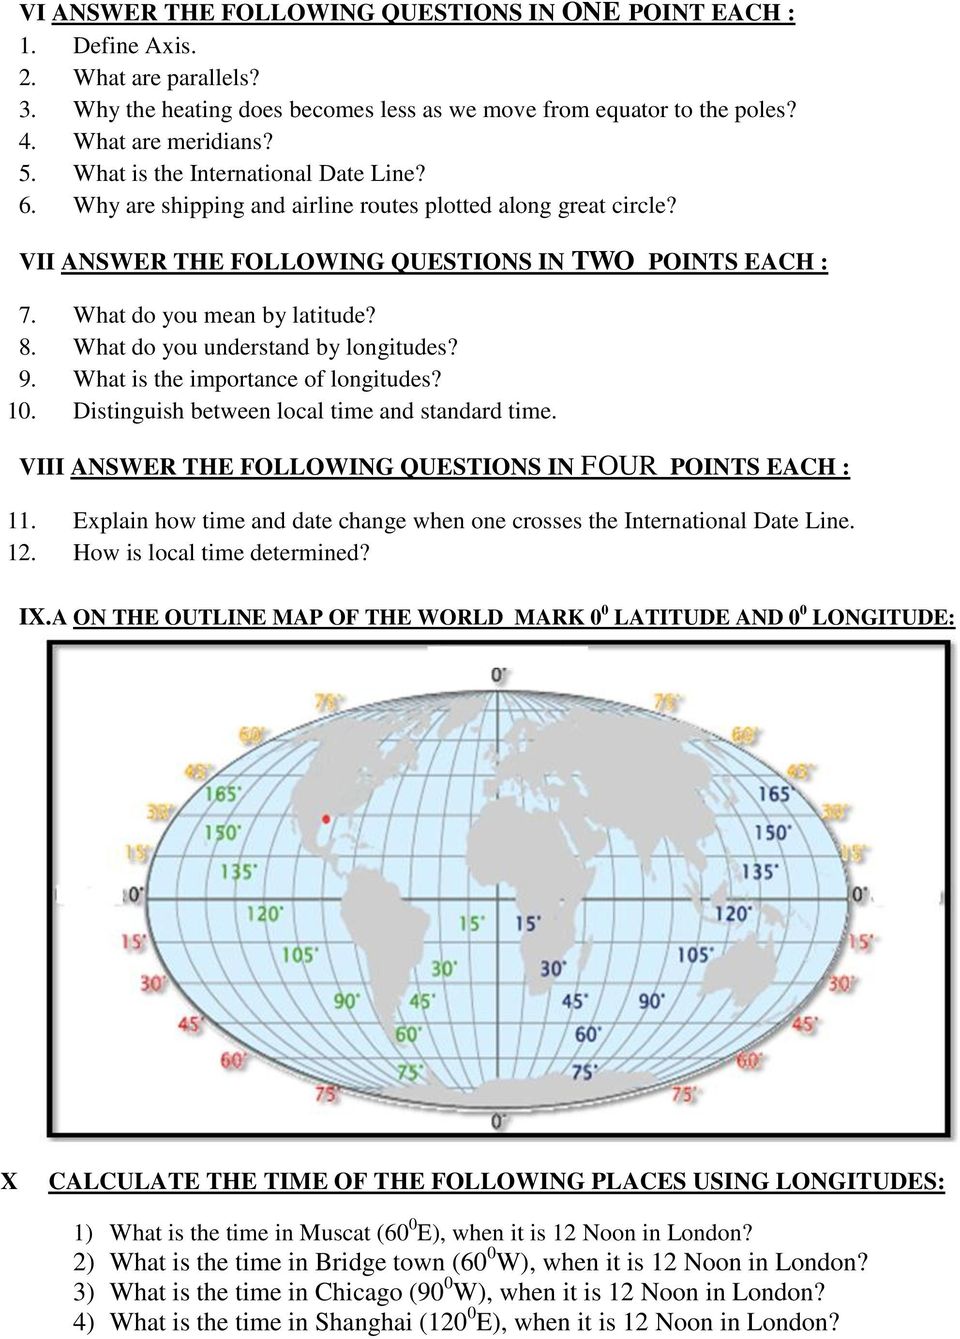 What do you understand by longitudes? 9. What is the importance of longitudes? 10. Distinguish between local time and standard time. VIII ANSWER THE FOLLOWING QUESTIONS IN FOUR POINTS EACH : 11.